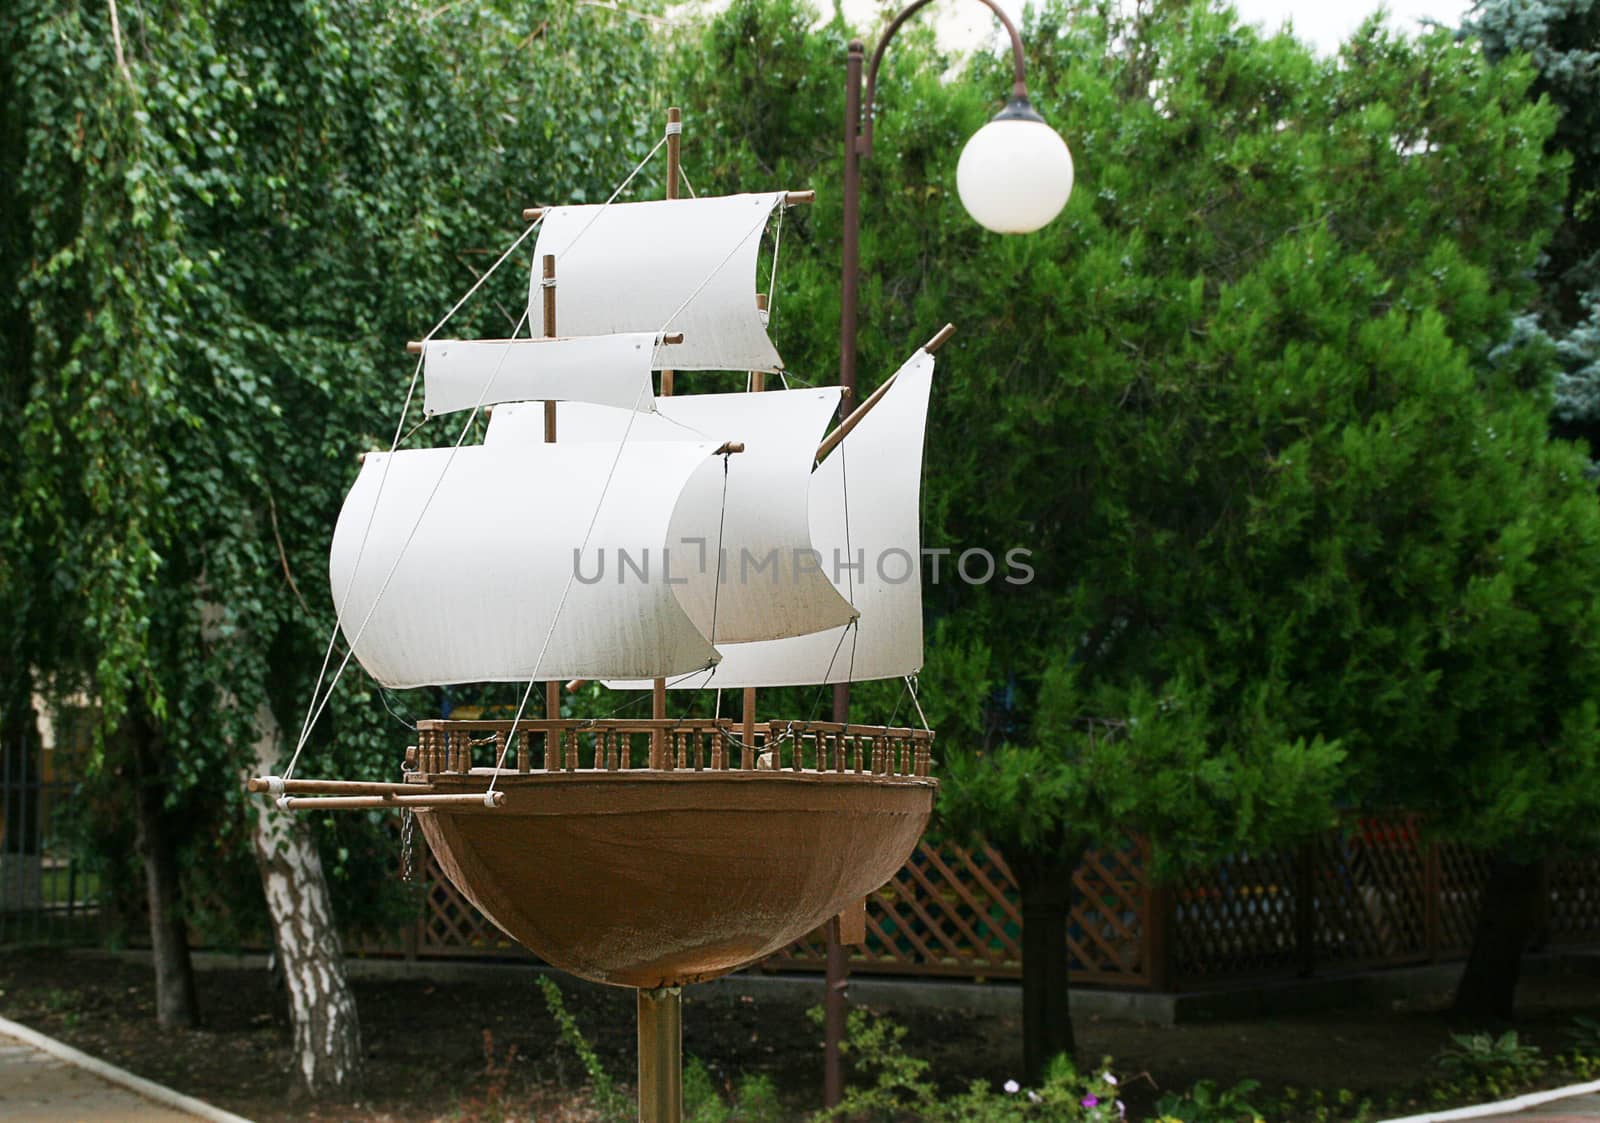 A sailboat made of stone and wood is mounted on a pedestal against the background of trees.